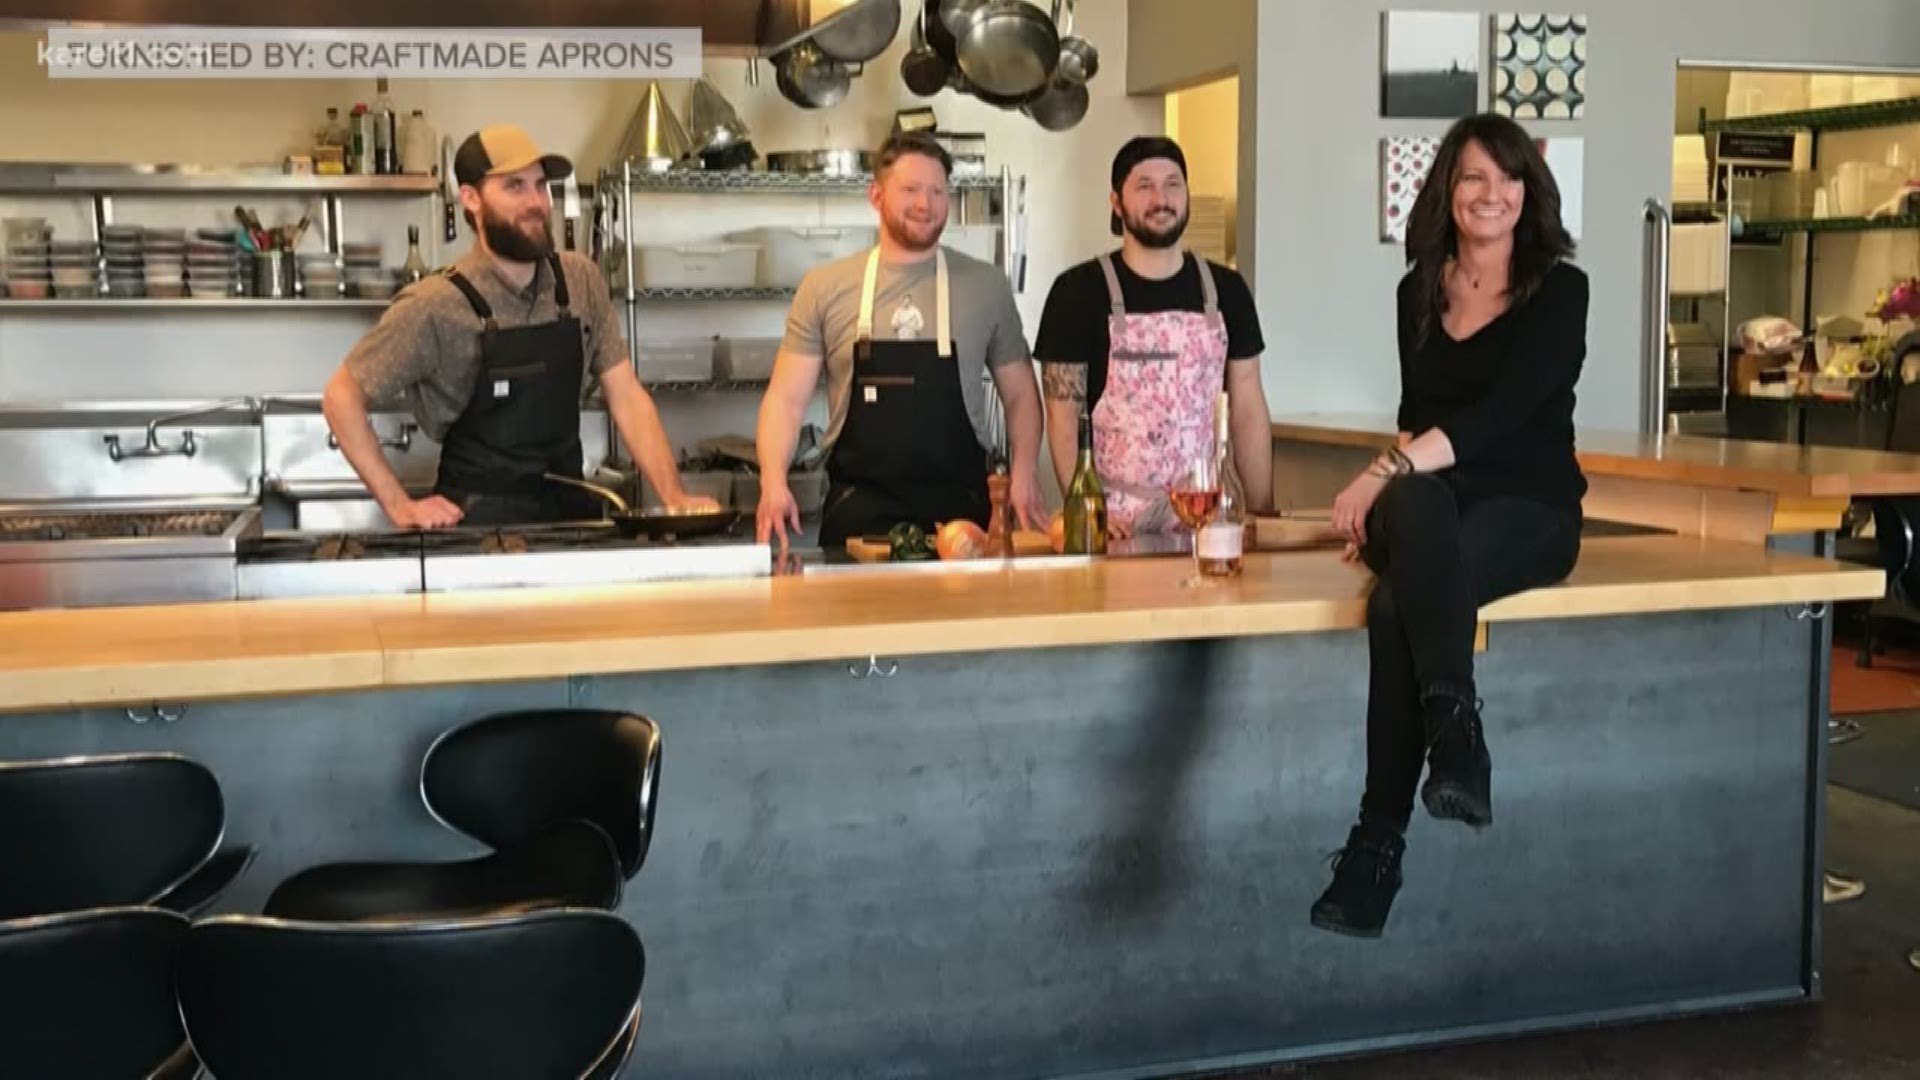 What started out as a mom making aprons for her chef son has turned into a small business that is sharing its success with the service industry.